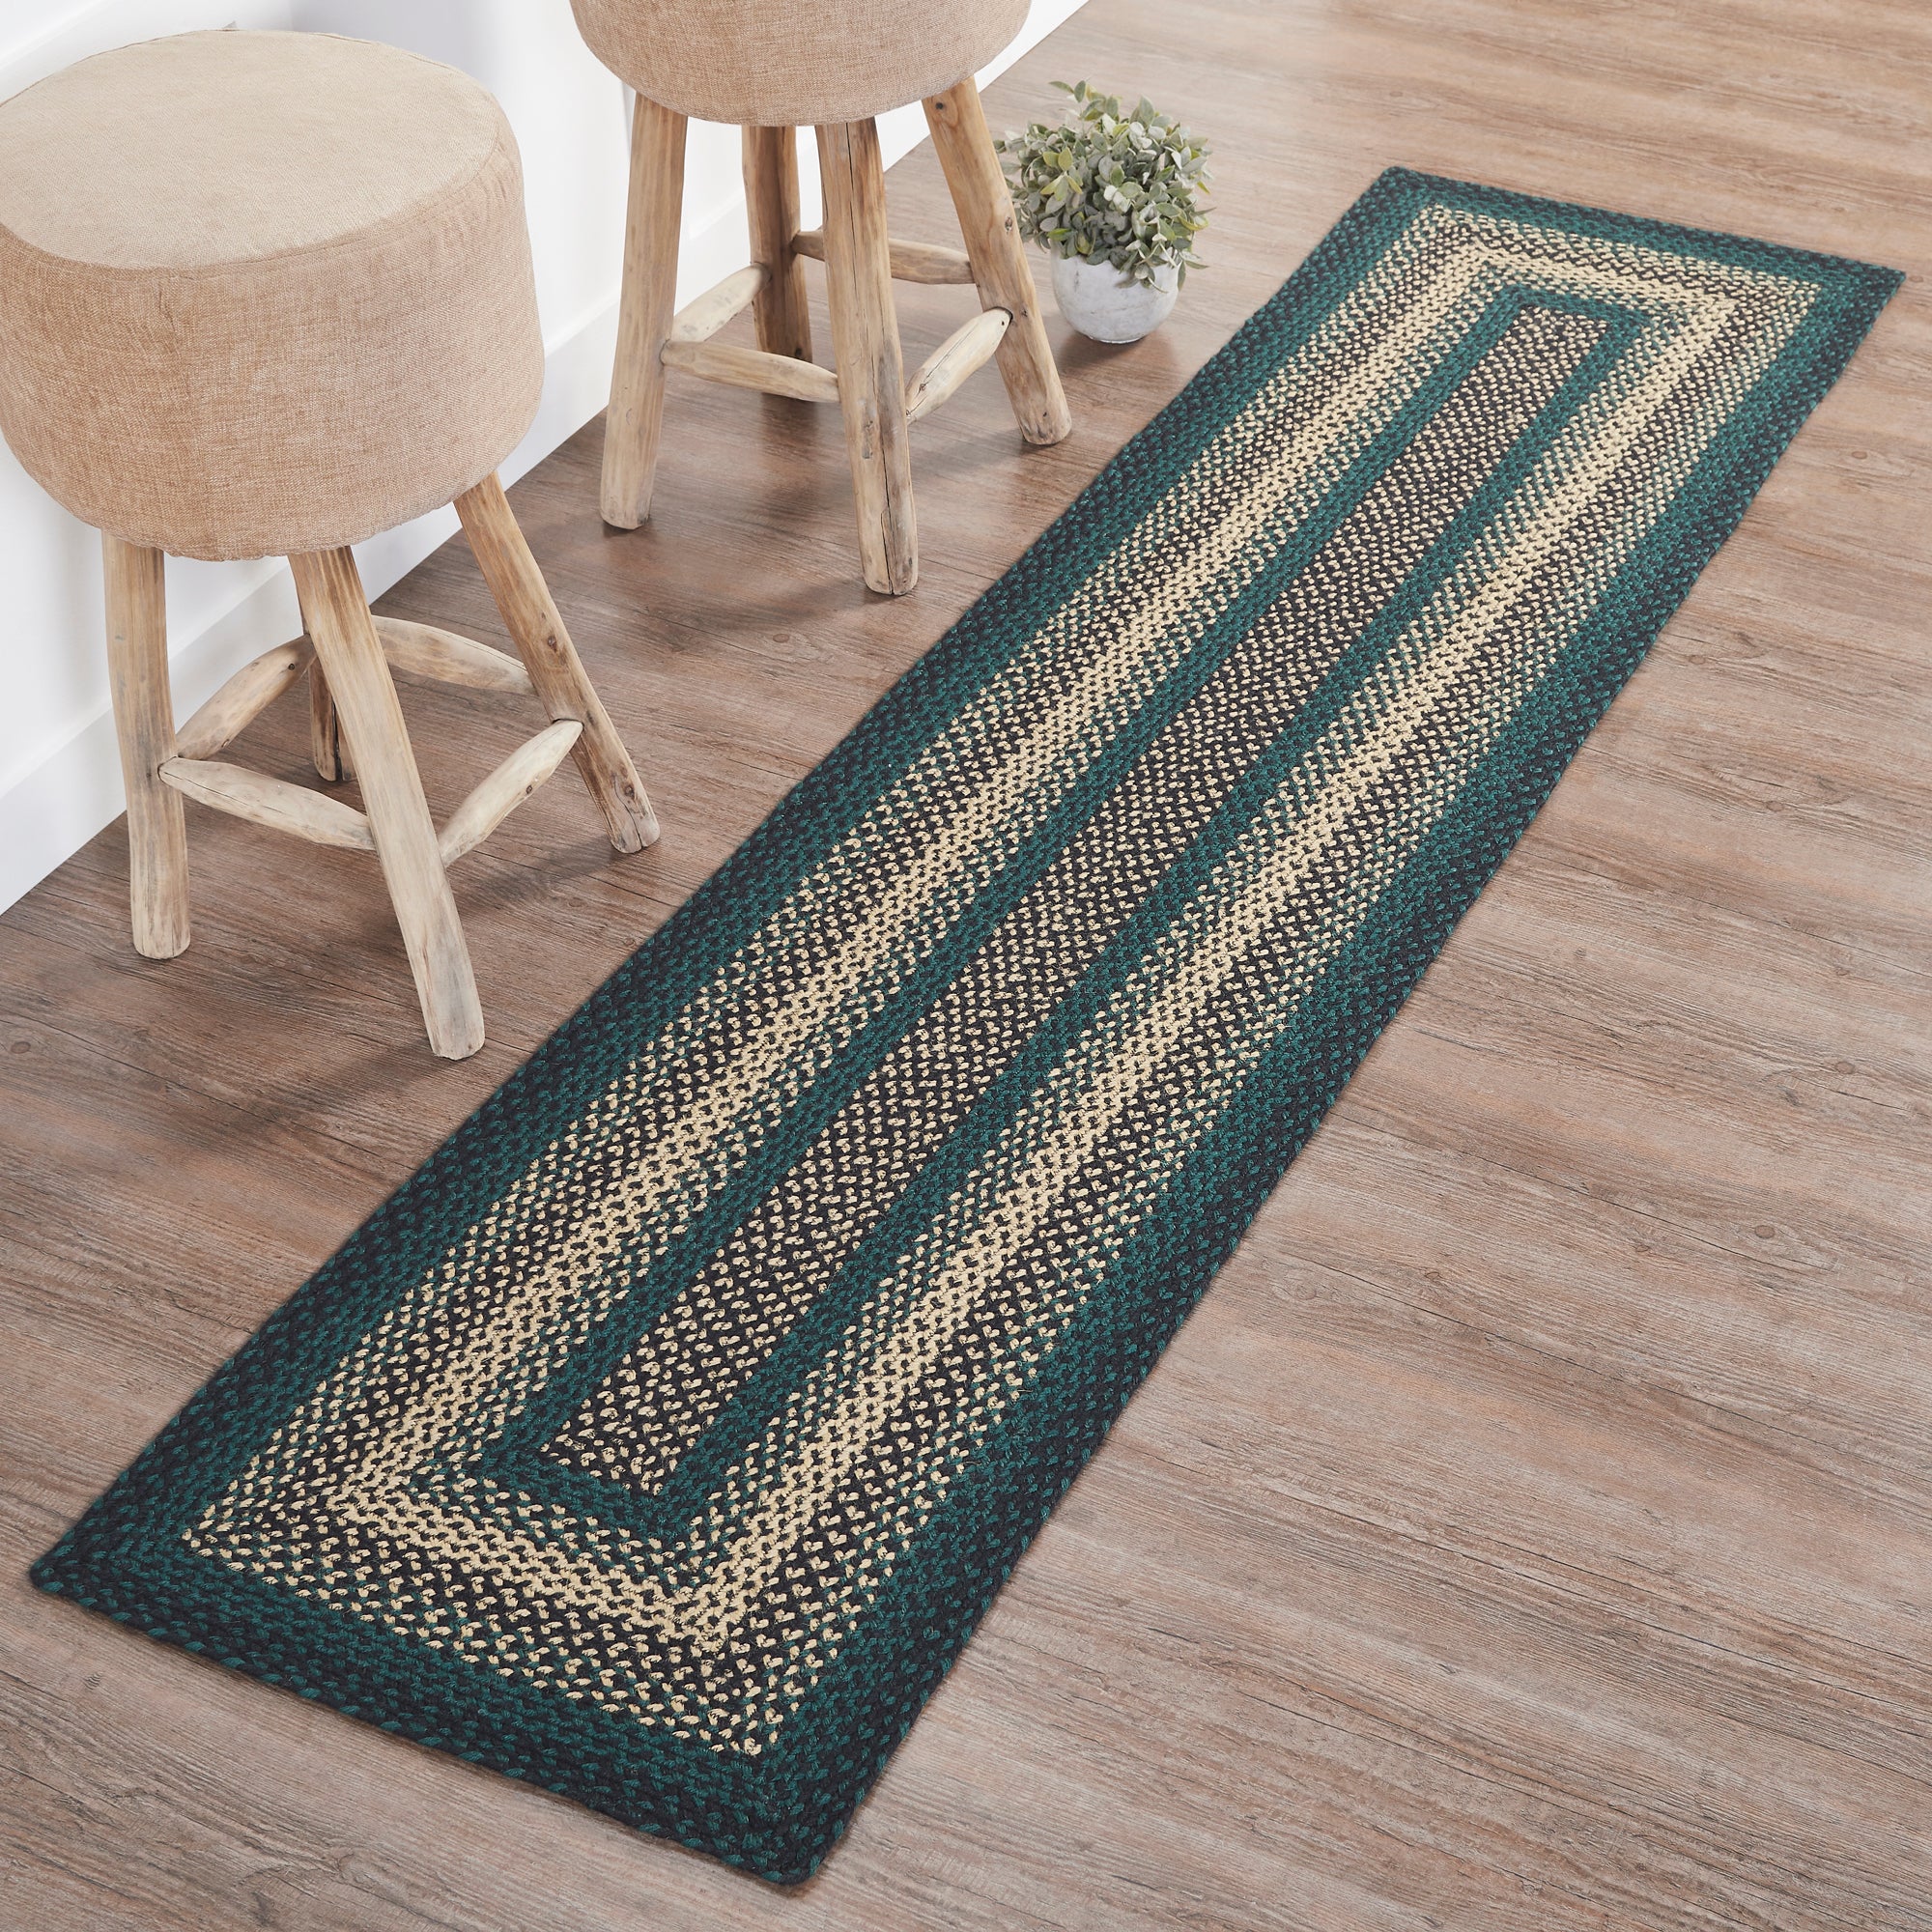 Black & Tan Jute Braided Rug/Runner Rect. with Rug Pad 2'x8' VHC